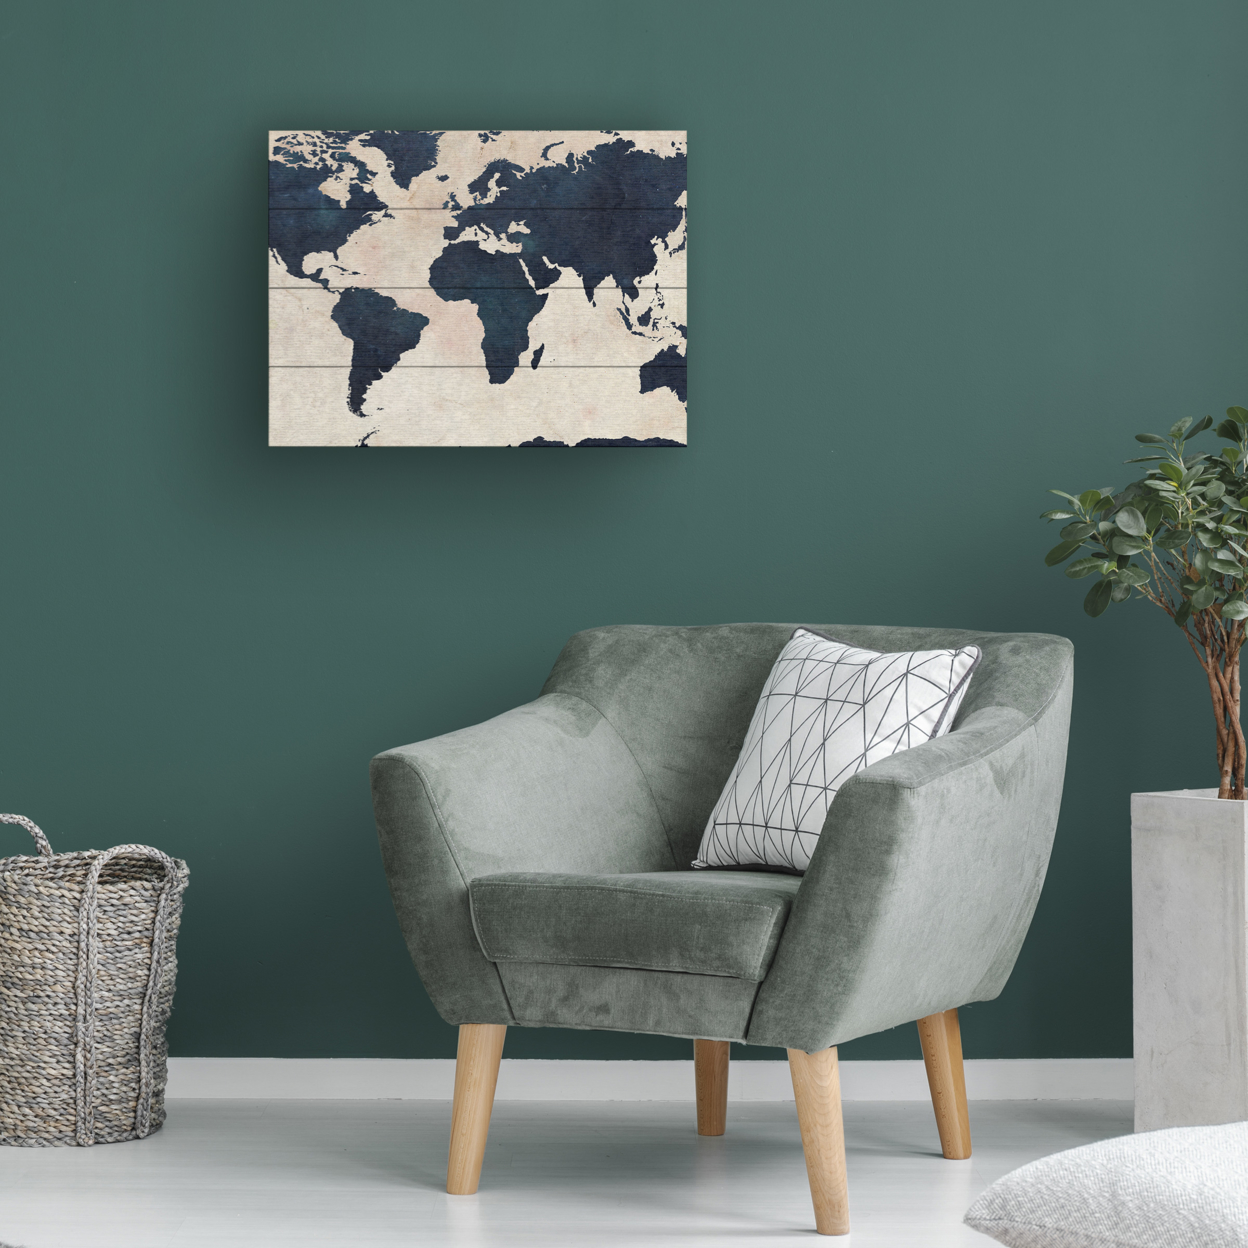 Wall Art 12 X 16 Inches Titled World Map -Navy Ready To Hang Printed On Wooden Planks